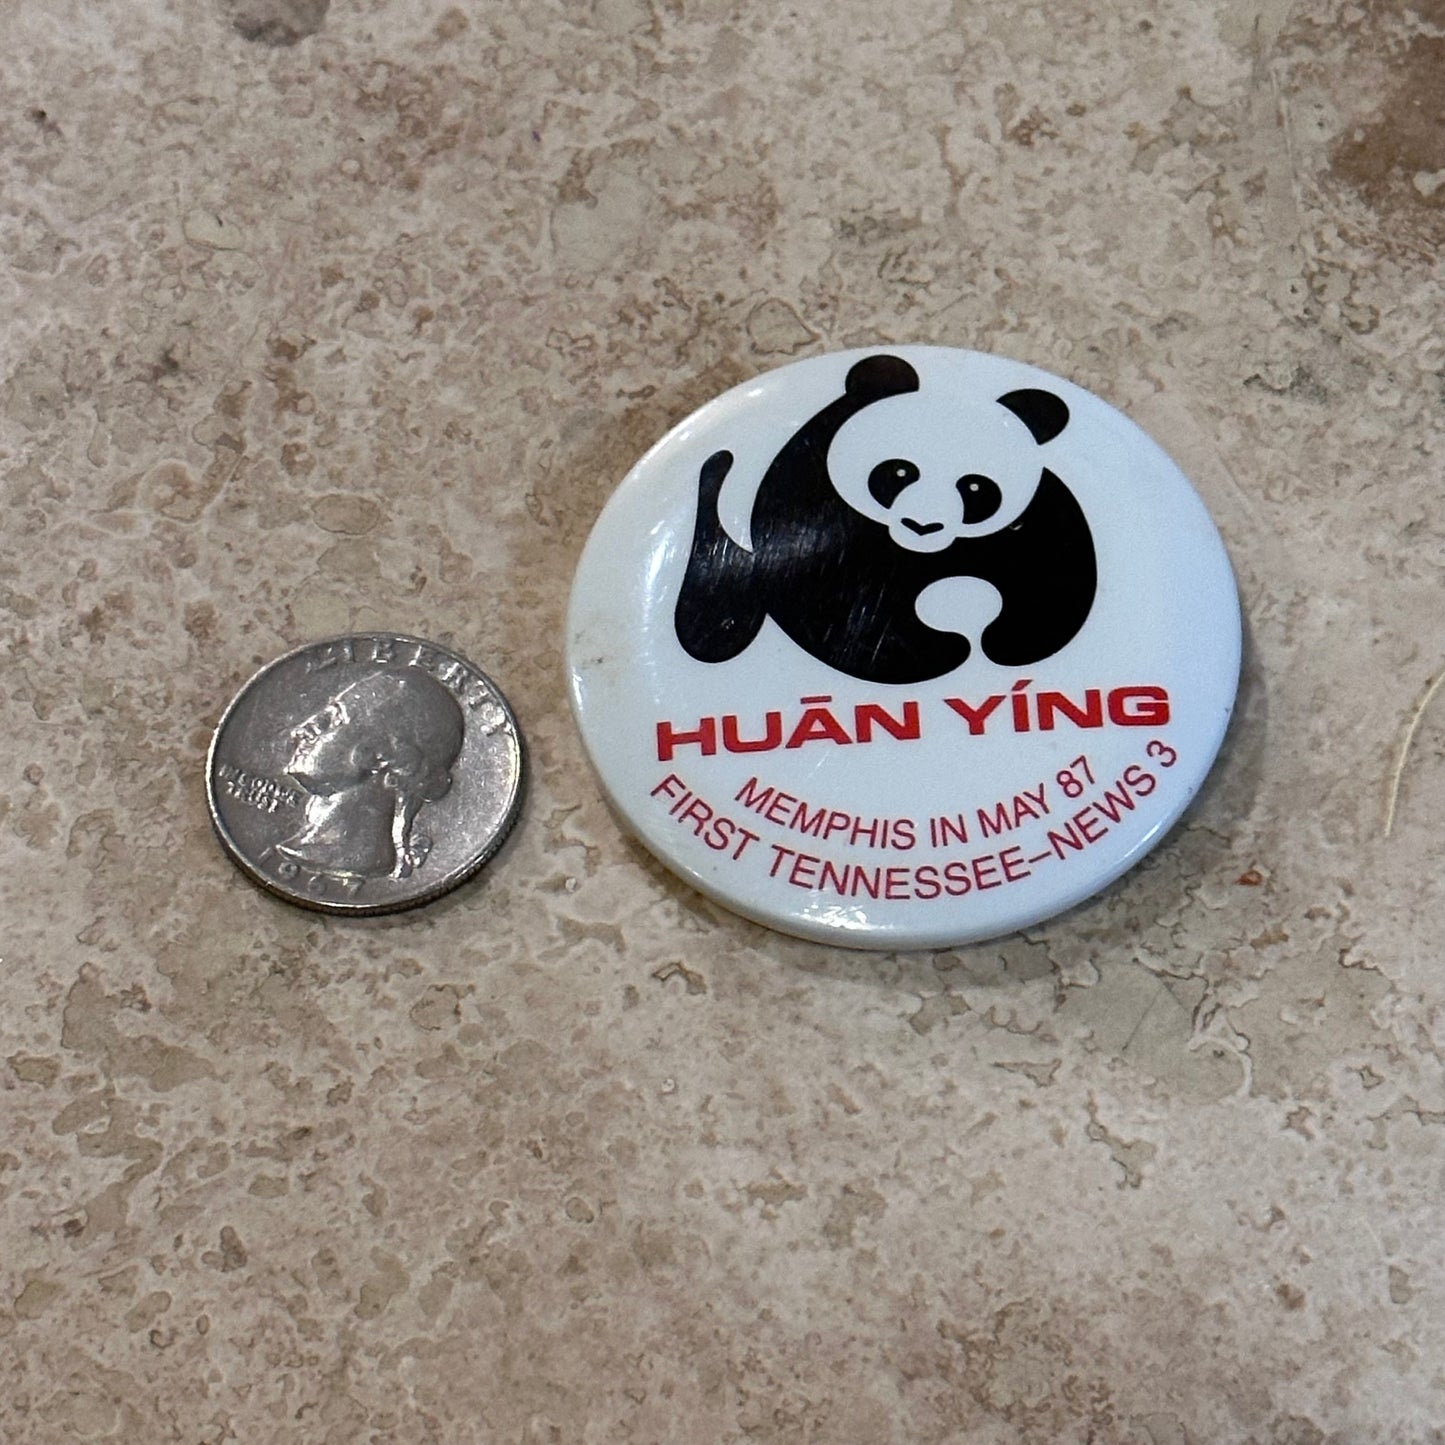 1980s Memphis in May Salutes China 1987 Pinback Button, Huan Ying, Welcome, 2”